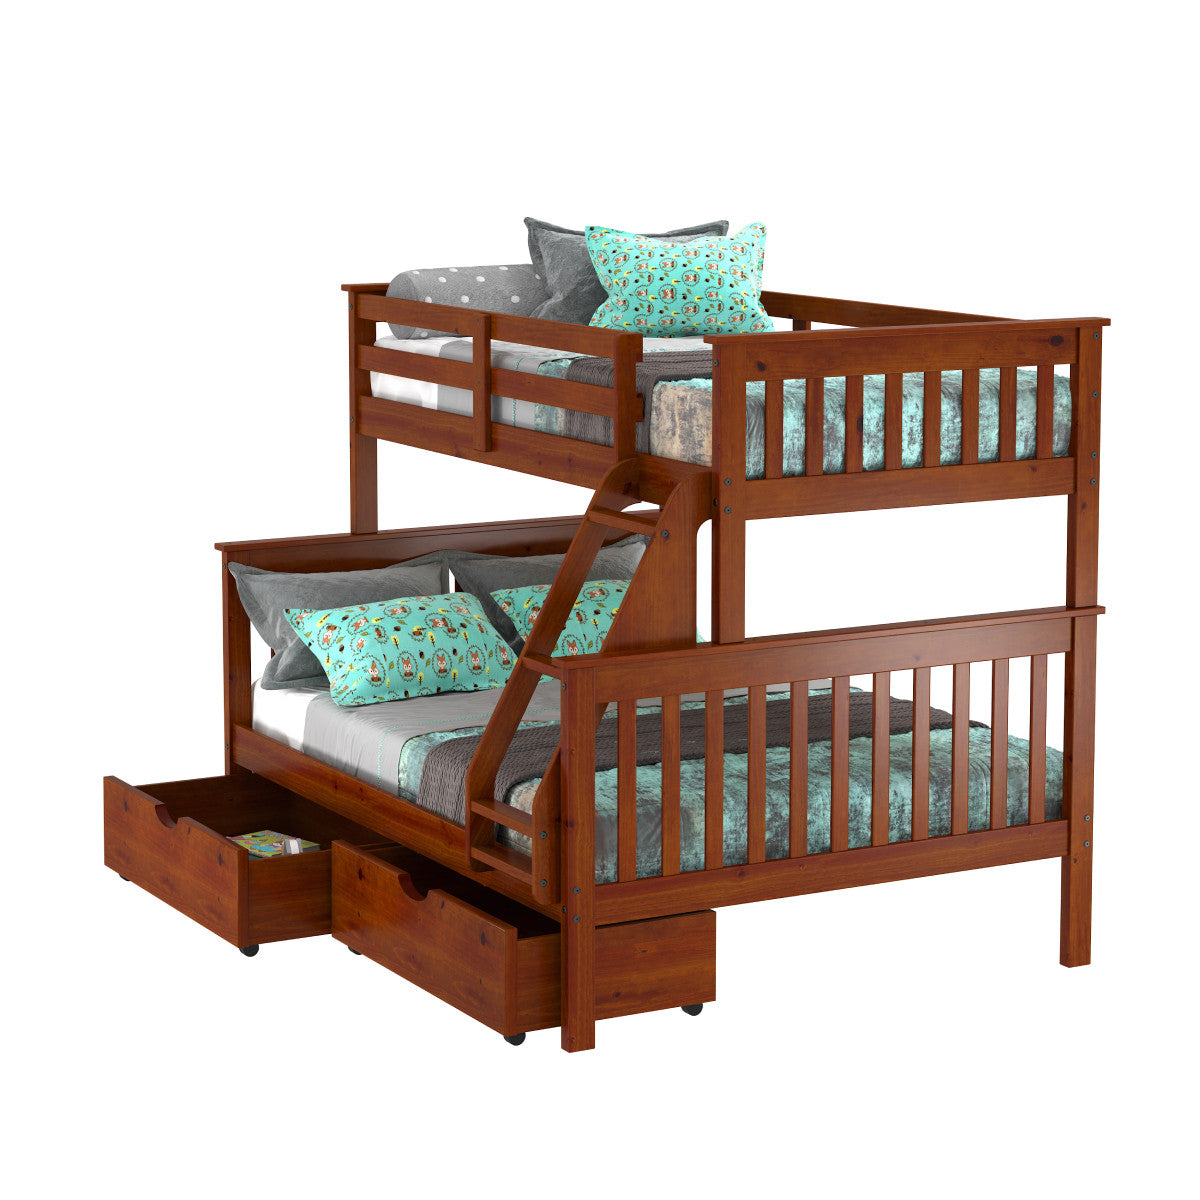 TWIN/FULL MISSION BUNKBED WITH DUAL UNDERBED DRAWERS ESPRESSO